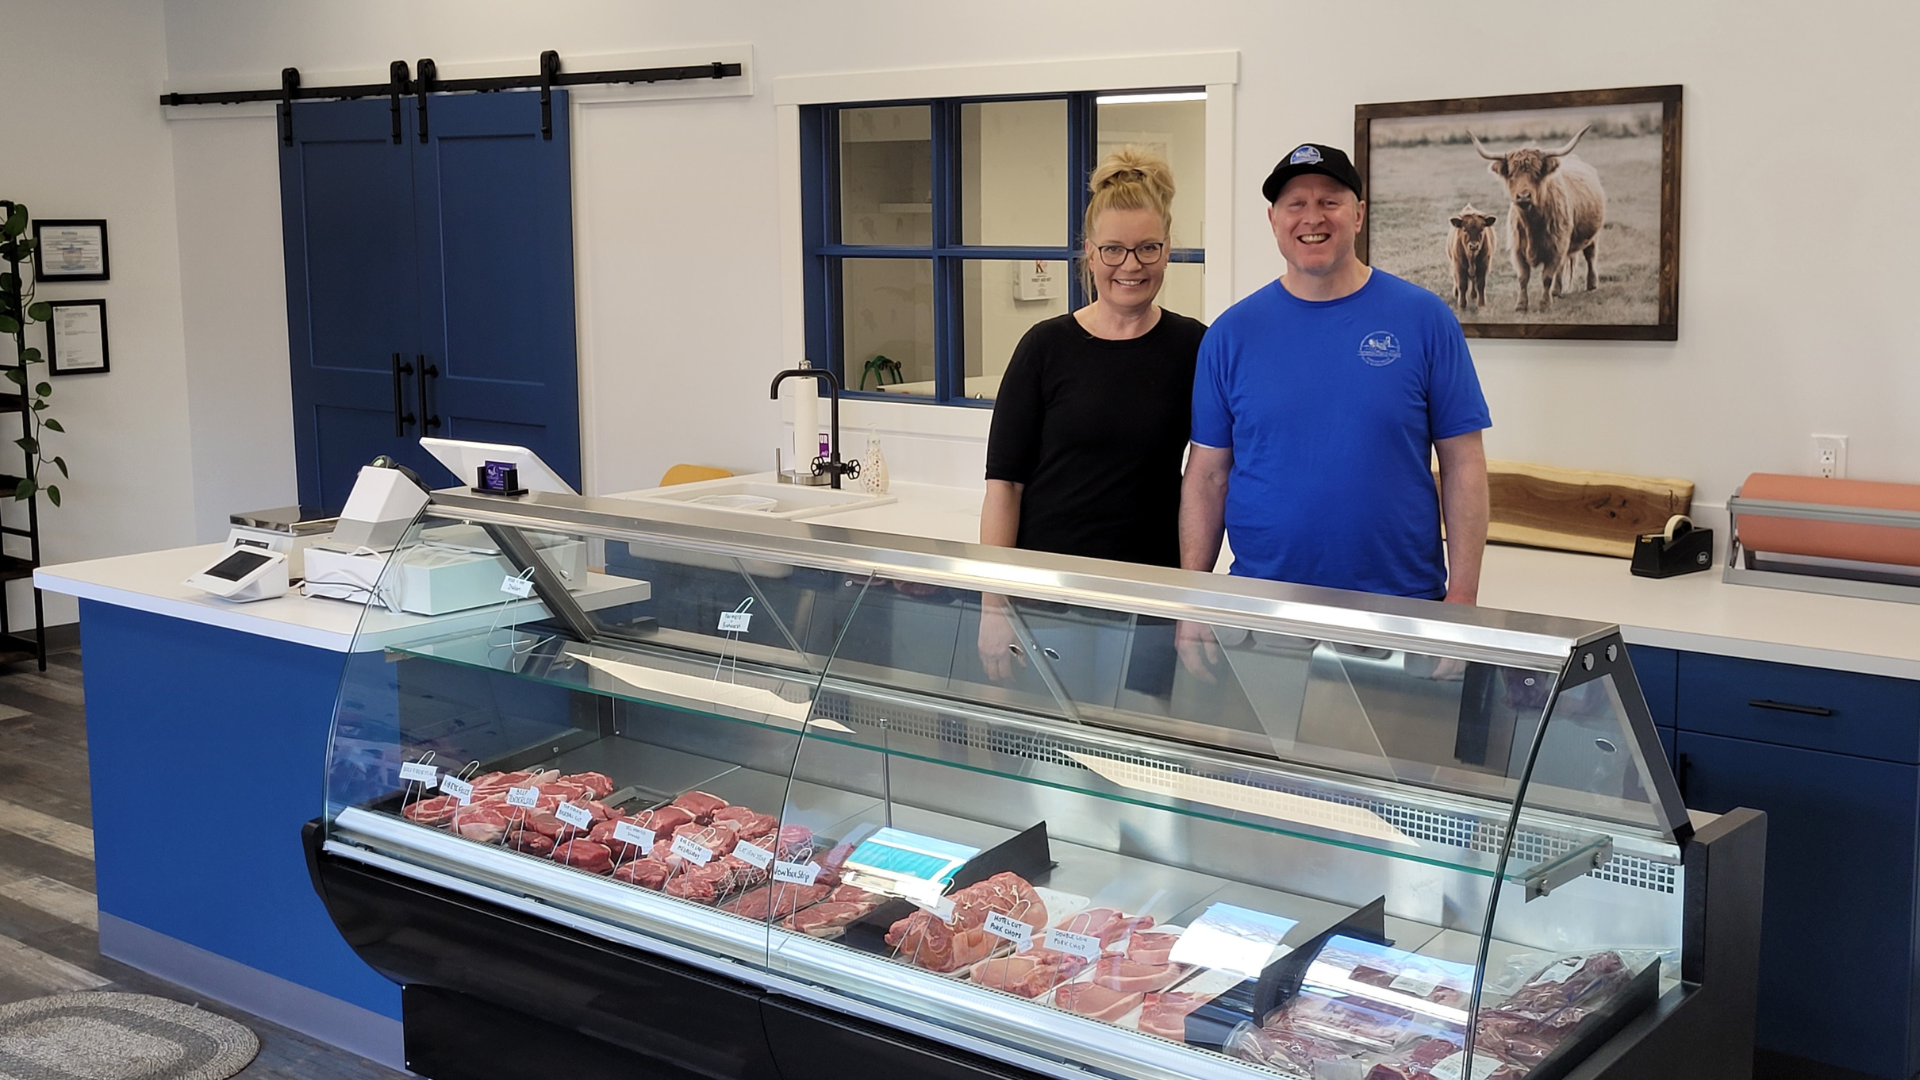 Traditional Meat Market in Brooks opens business with support from Community Futures Chinook and the Digital Service Squad